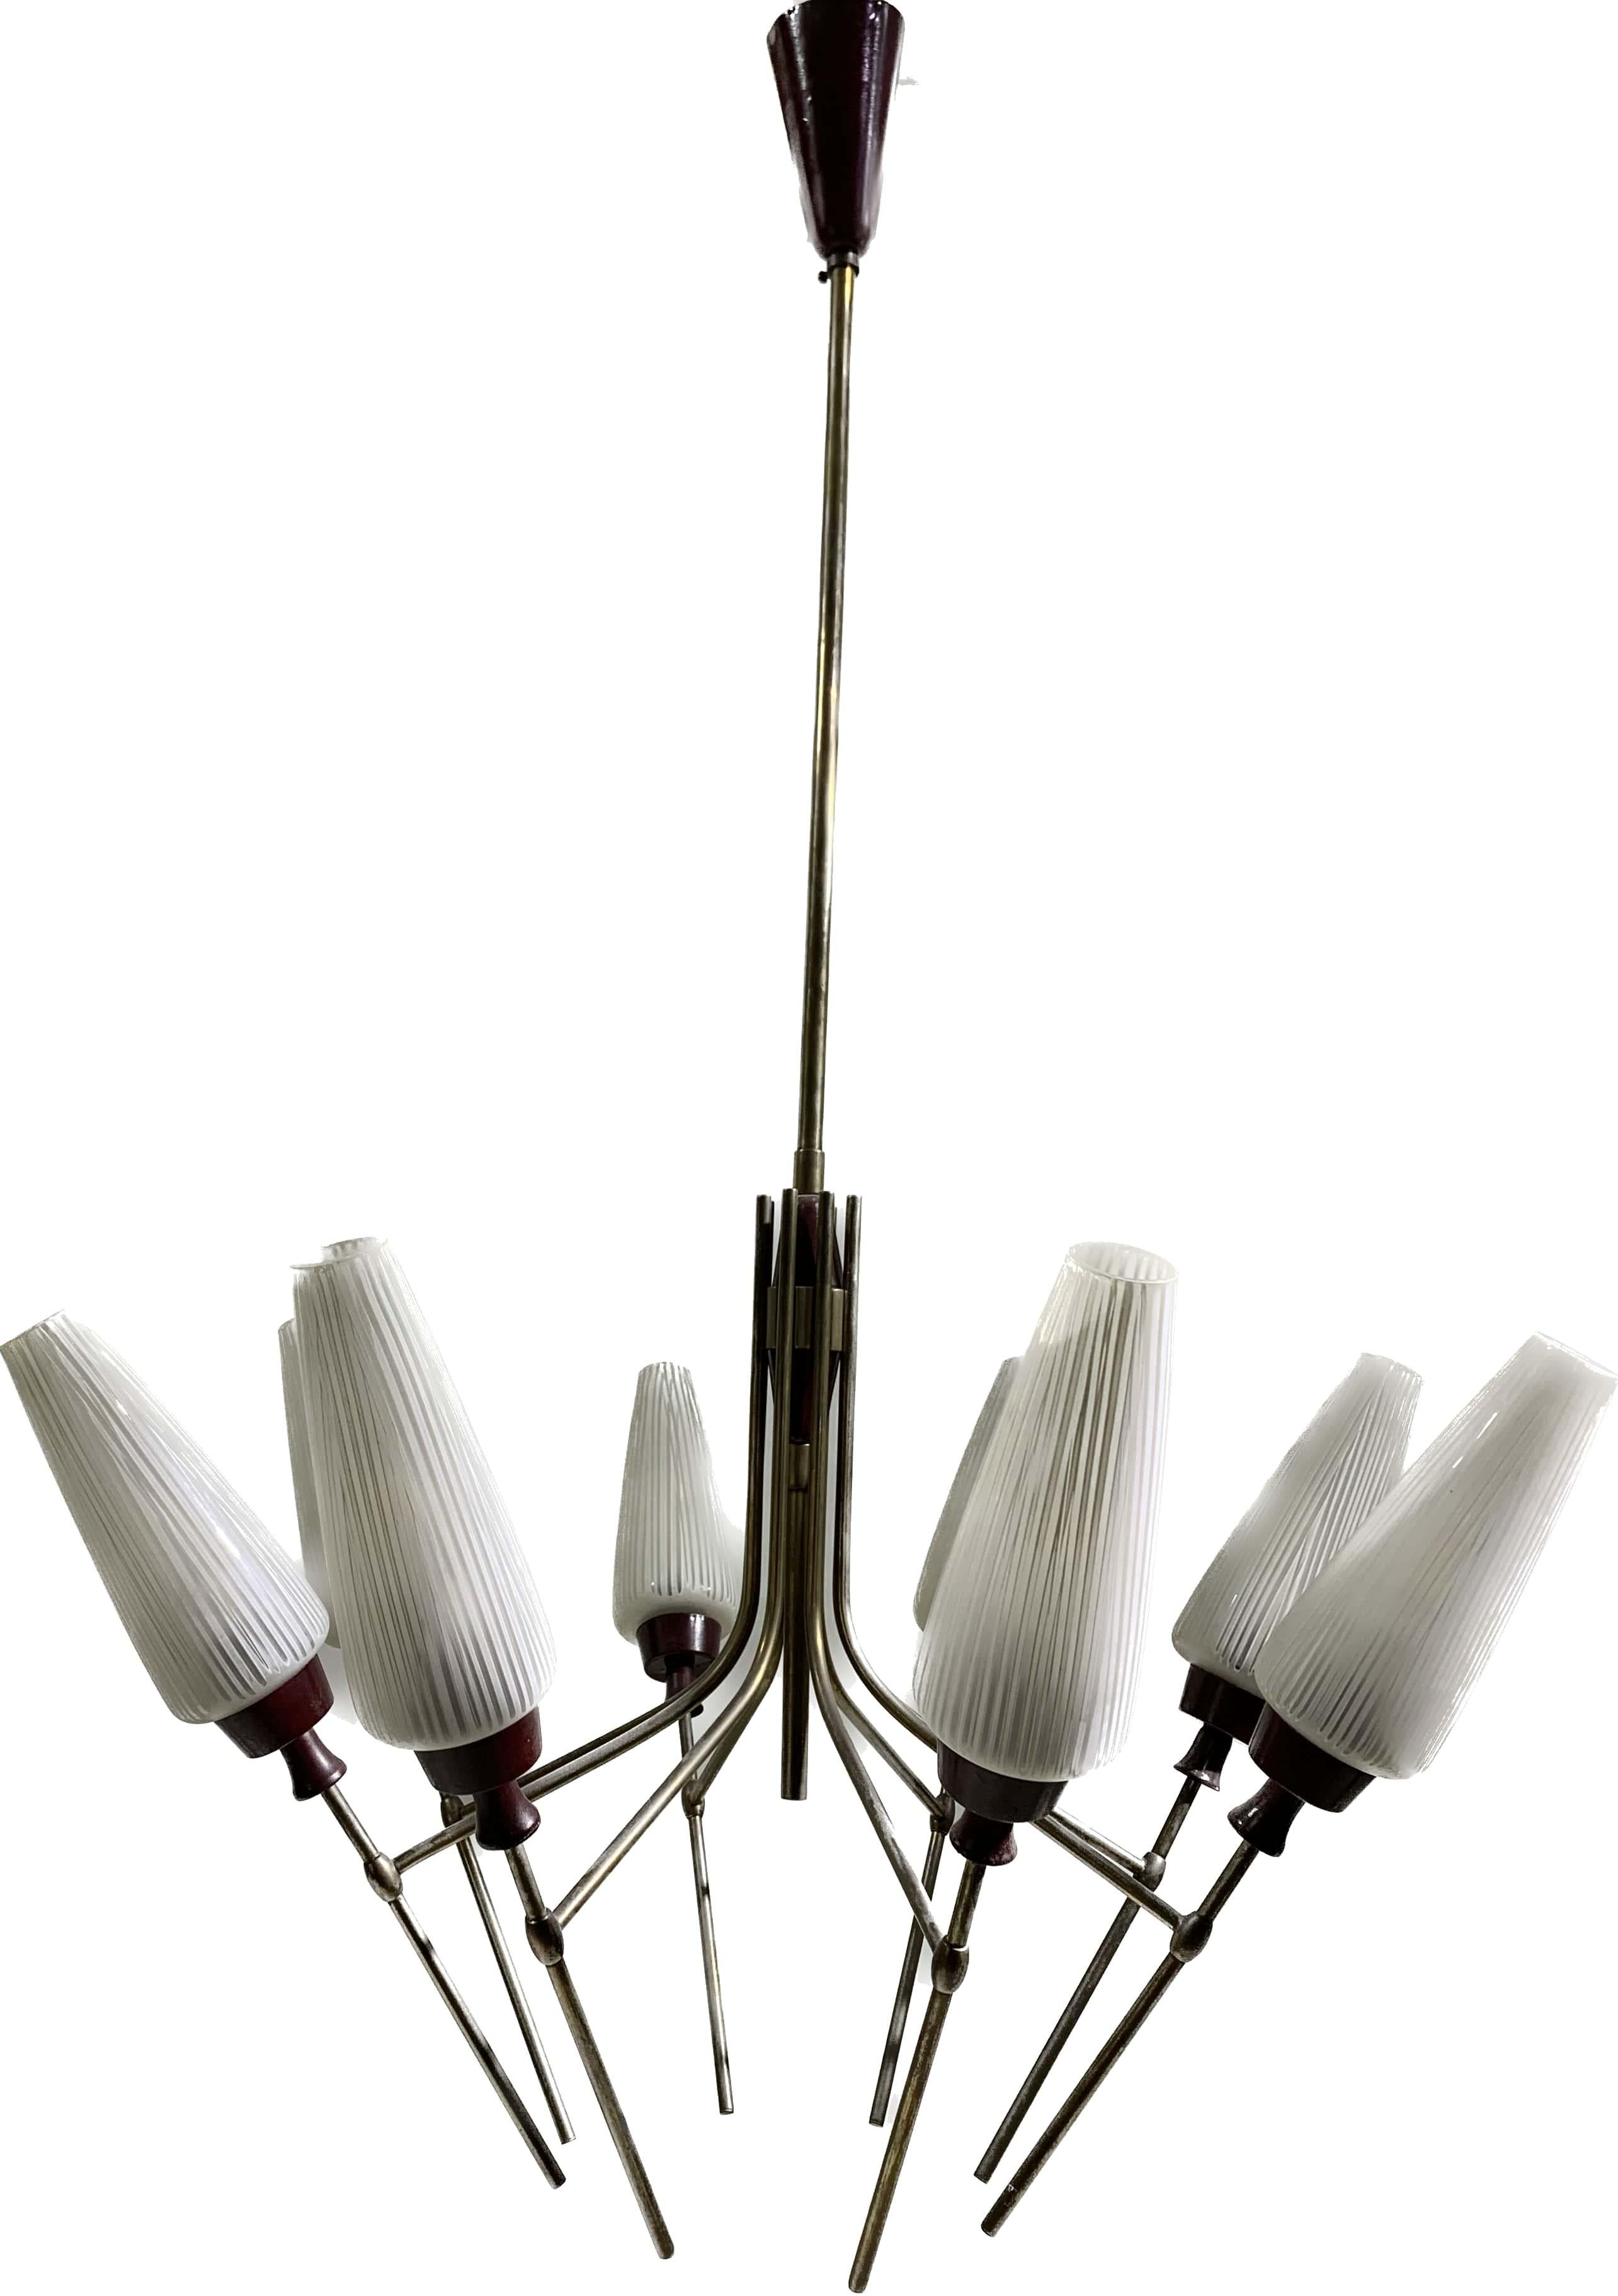 Midcentury chandelier made of bronze structure with eight « tulip » glass branches that have been sanded and striped. They each have an enamelled metal lampholding cup of the bordeaux colour, an intense and dark red visual.
This beautiful pending